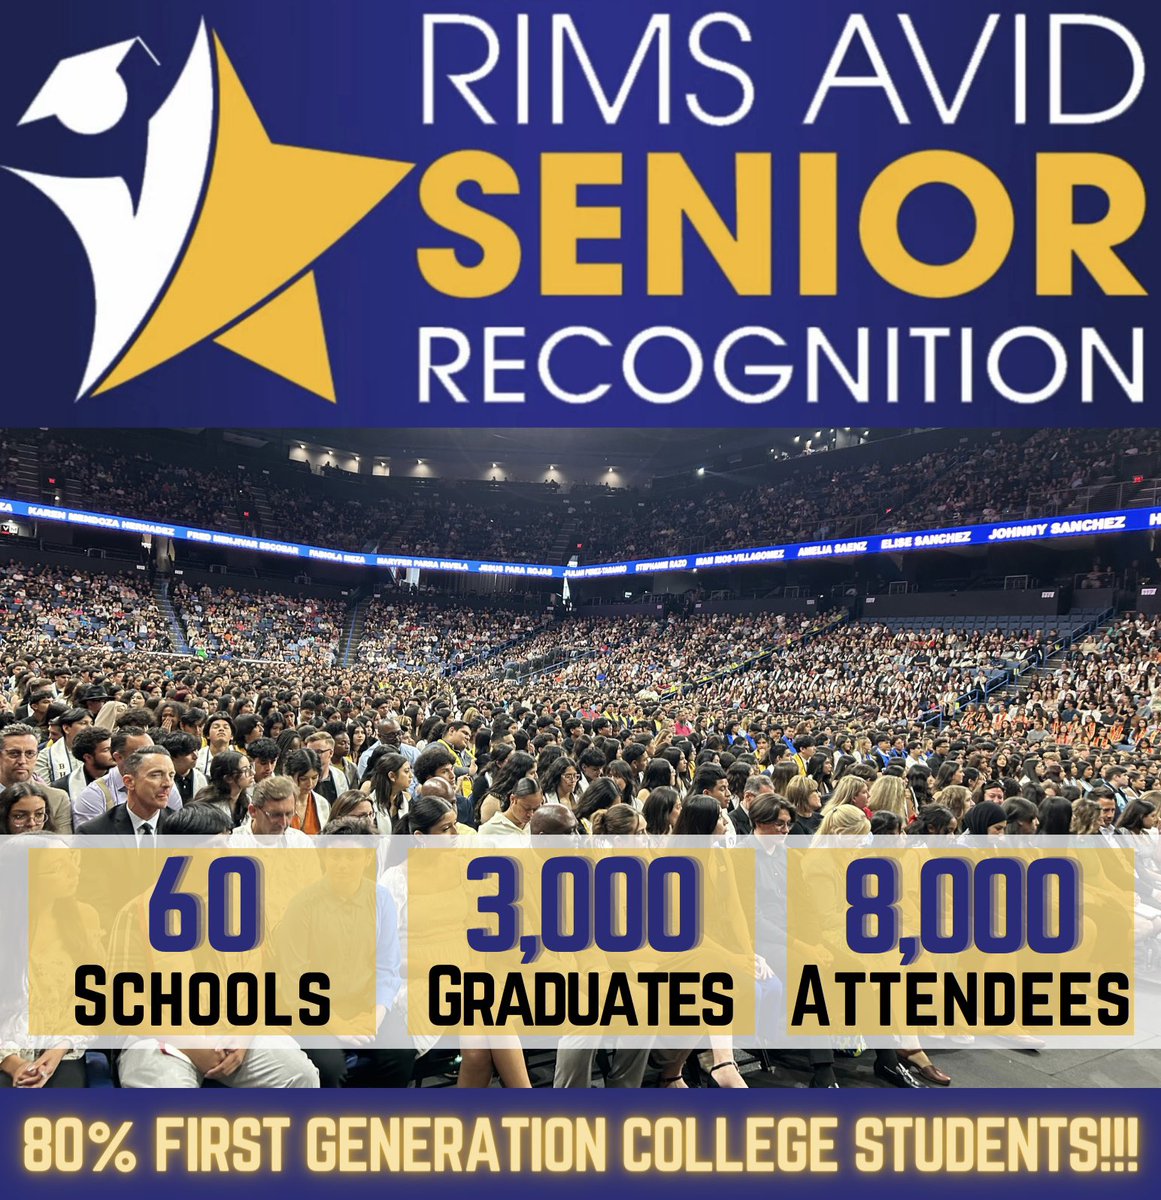 🌟 Celebrating Excellence! 🎓 RIMS AVID Senior Recognition shines a light on 3,000 graduates from 60 schools, gathering 8,000 family members, educators and supporters! So proud of these future college graduates, 80% of which are first generation! 🌟 @SBCountySchools @AVID4College